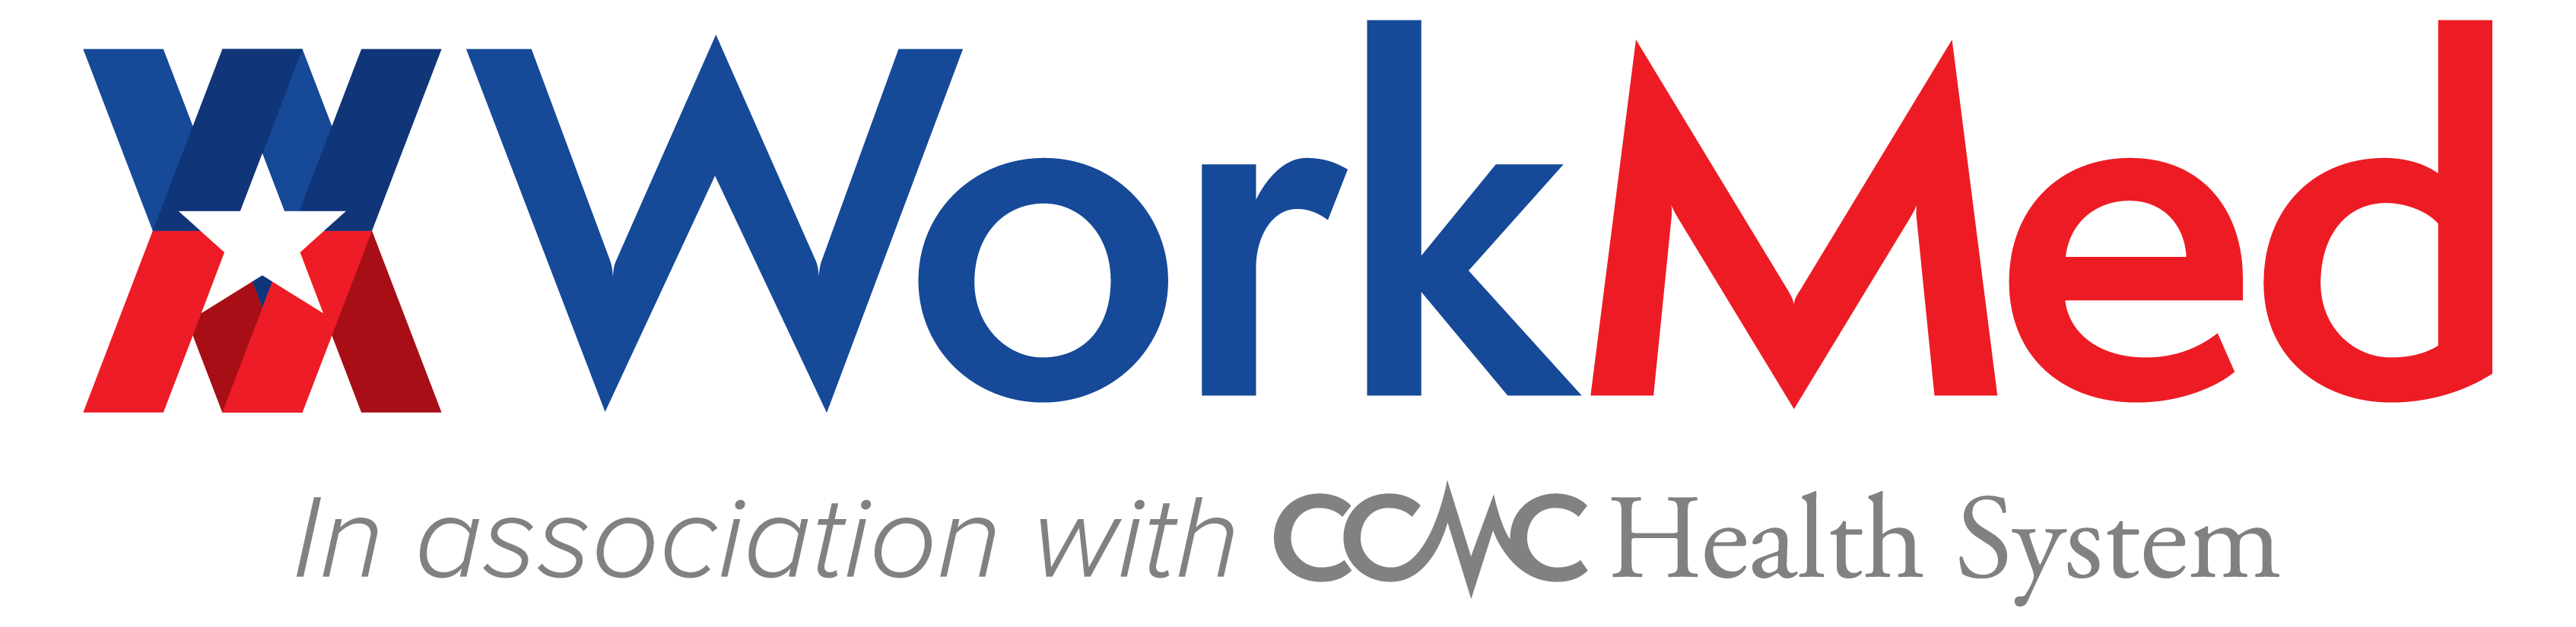 WorkMed - In association with CCMC Health System Logo